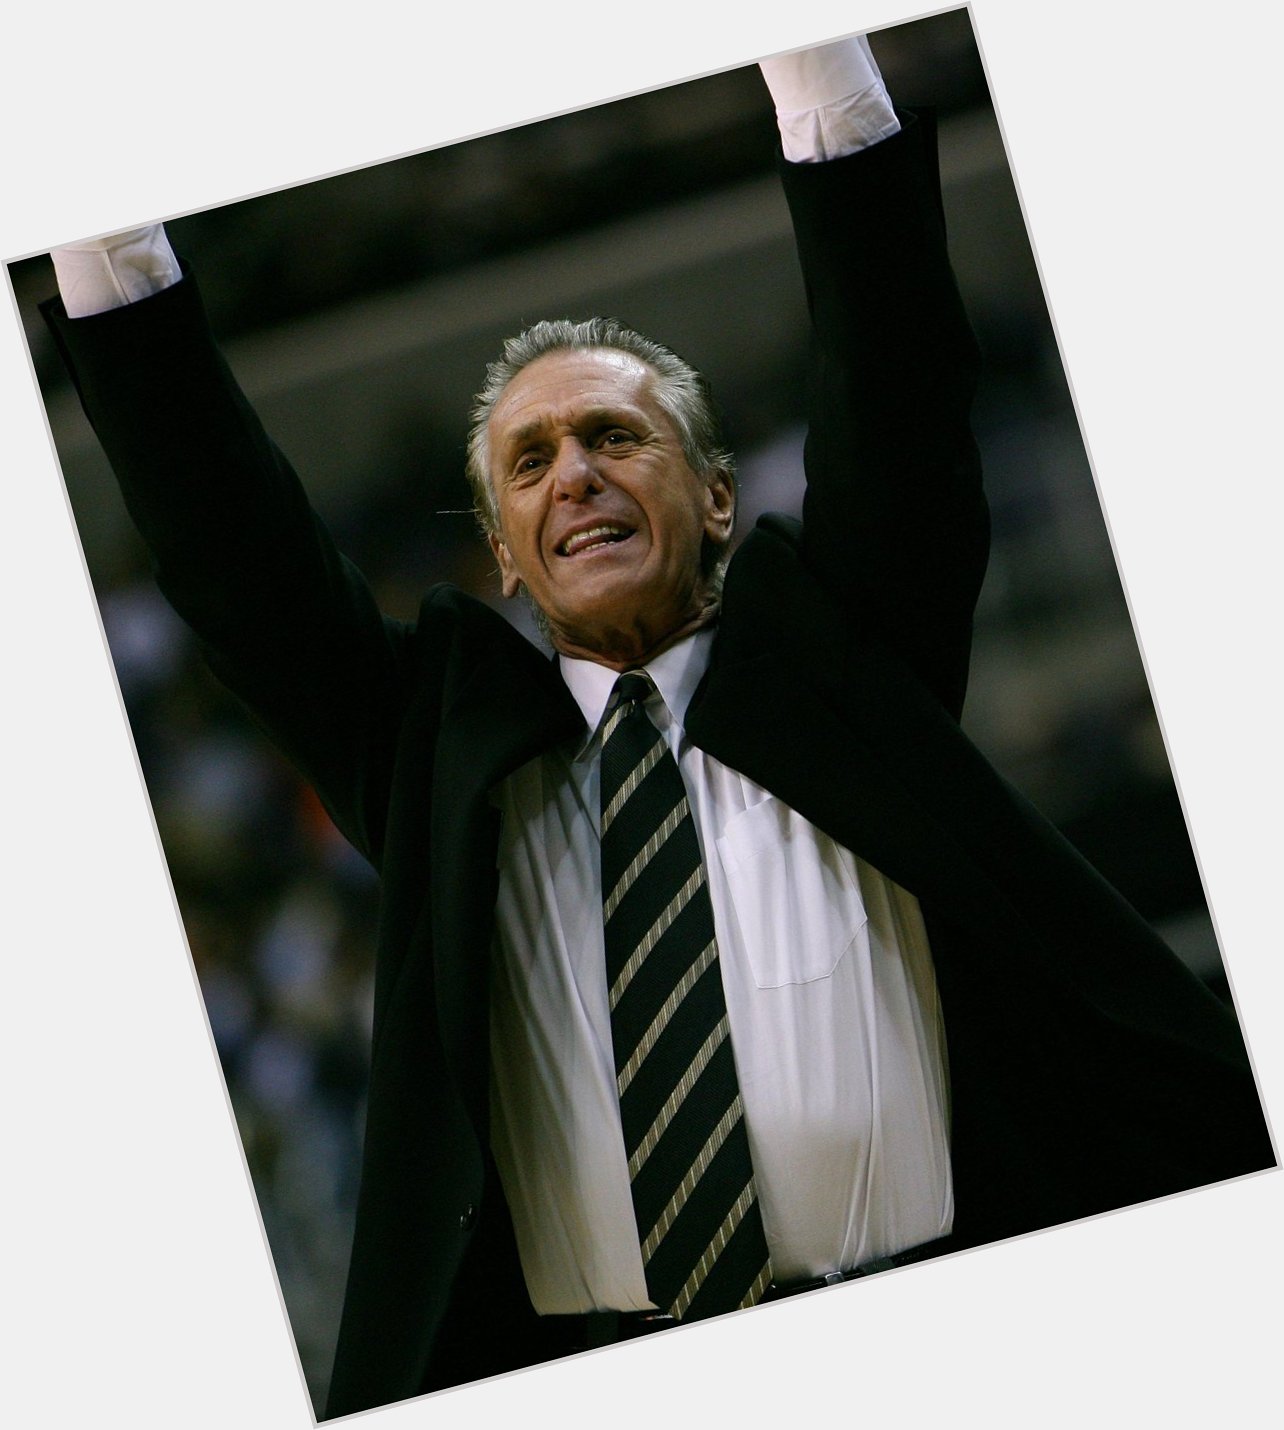 A very special birthday wish to our 1987 honoree, Pat Riley. Happy Birthday! 